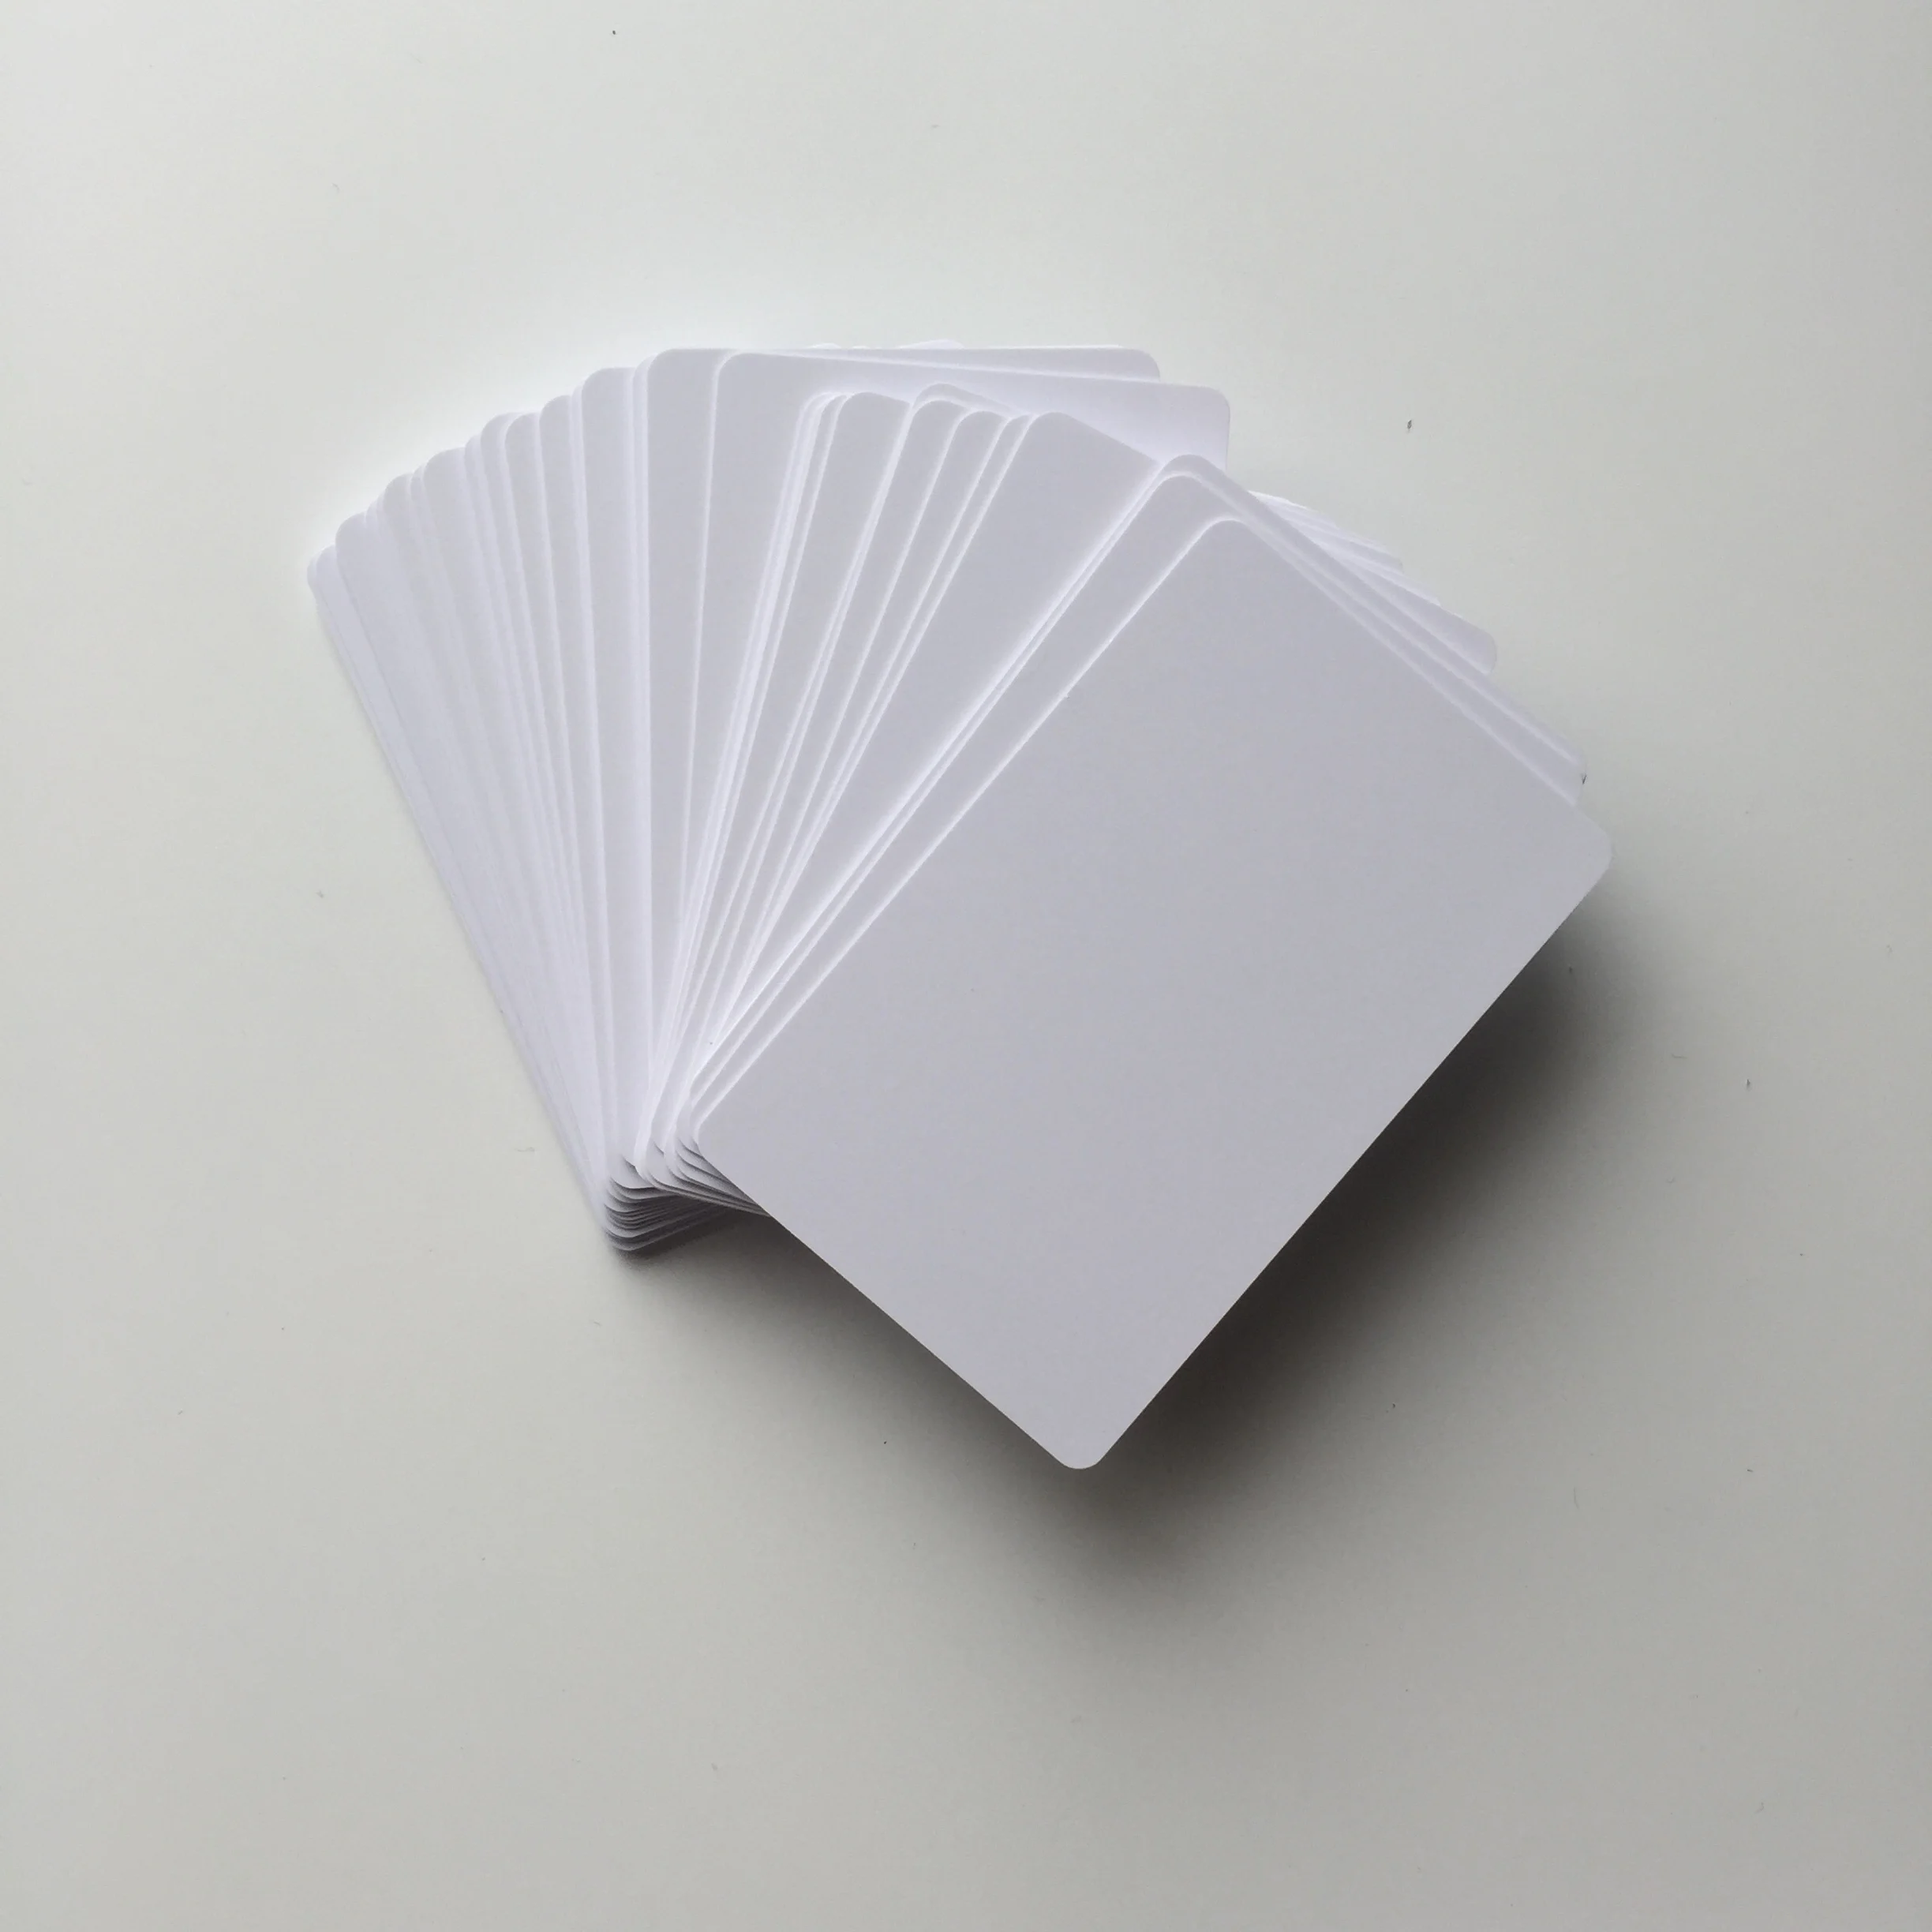 50pcs/lot blank inkjet plastic pvc card Printed by Epson or Canon printers used for school card business card